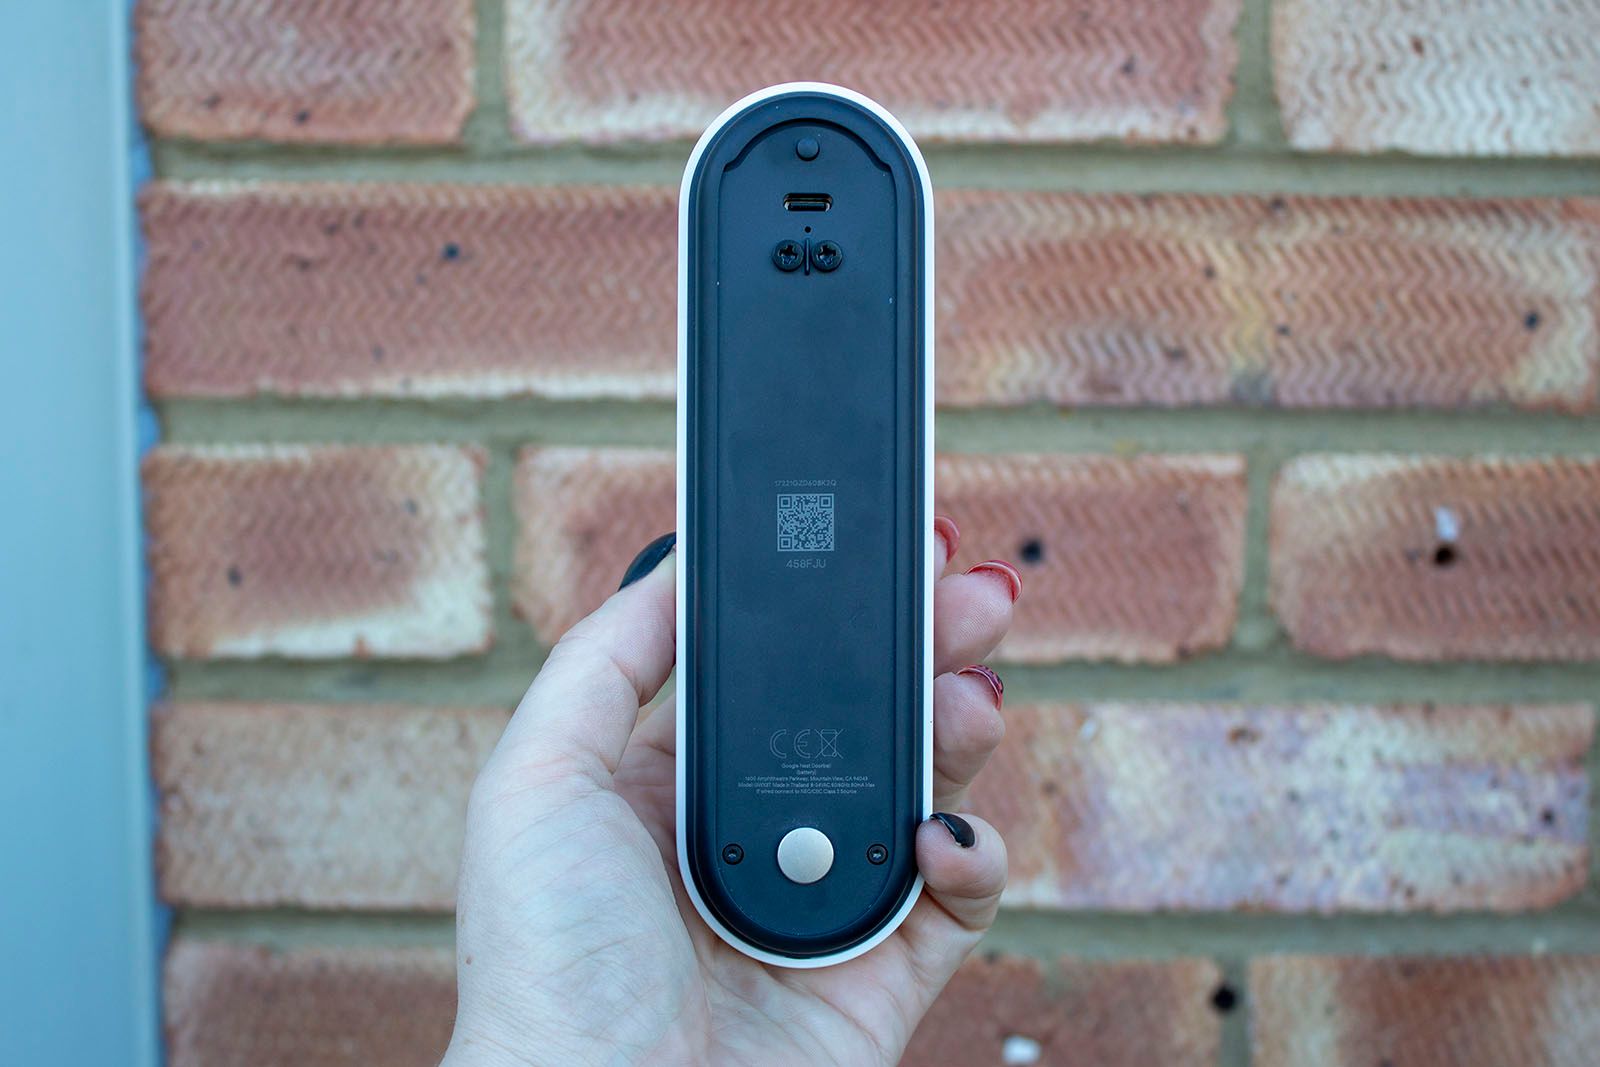 Google Nest Battery Doorbell review: A great Ring competitor photo 19